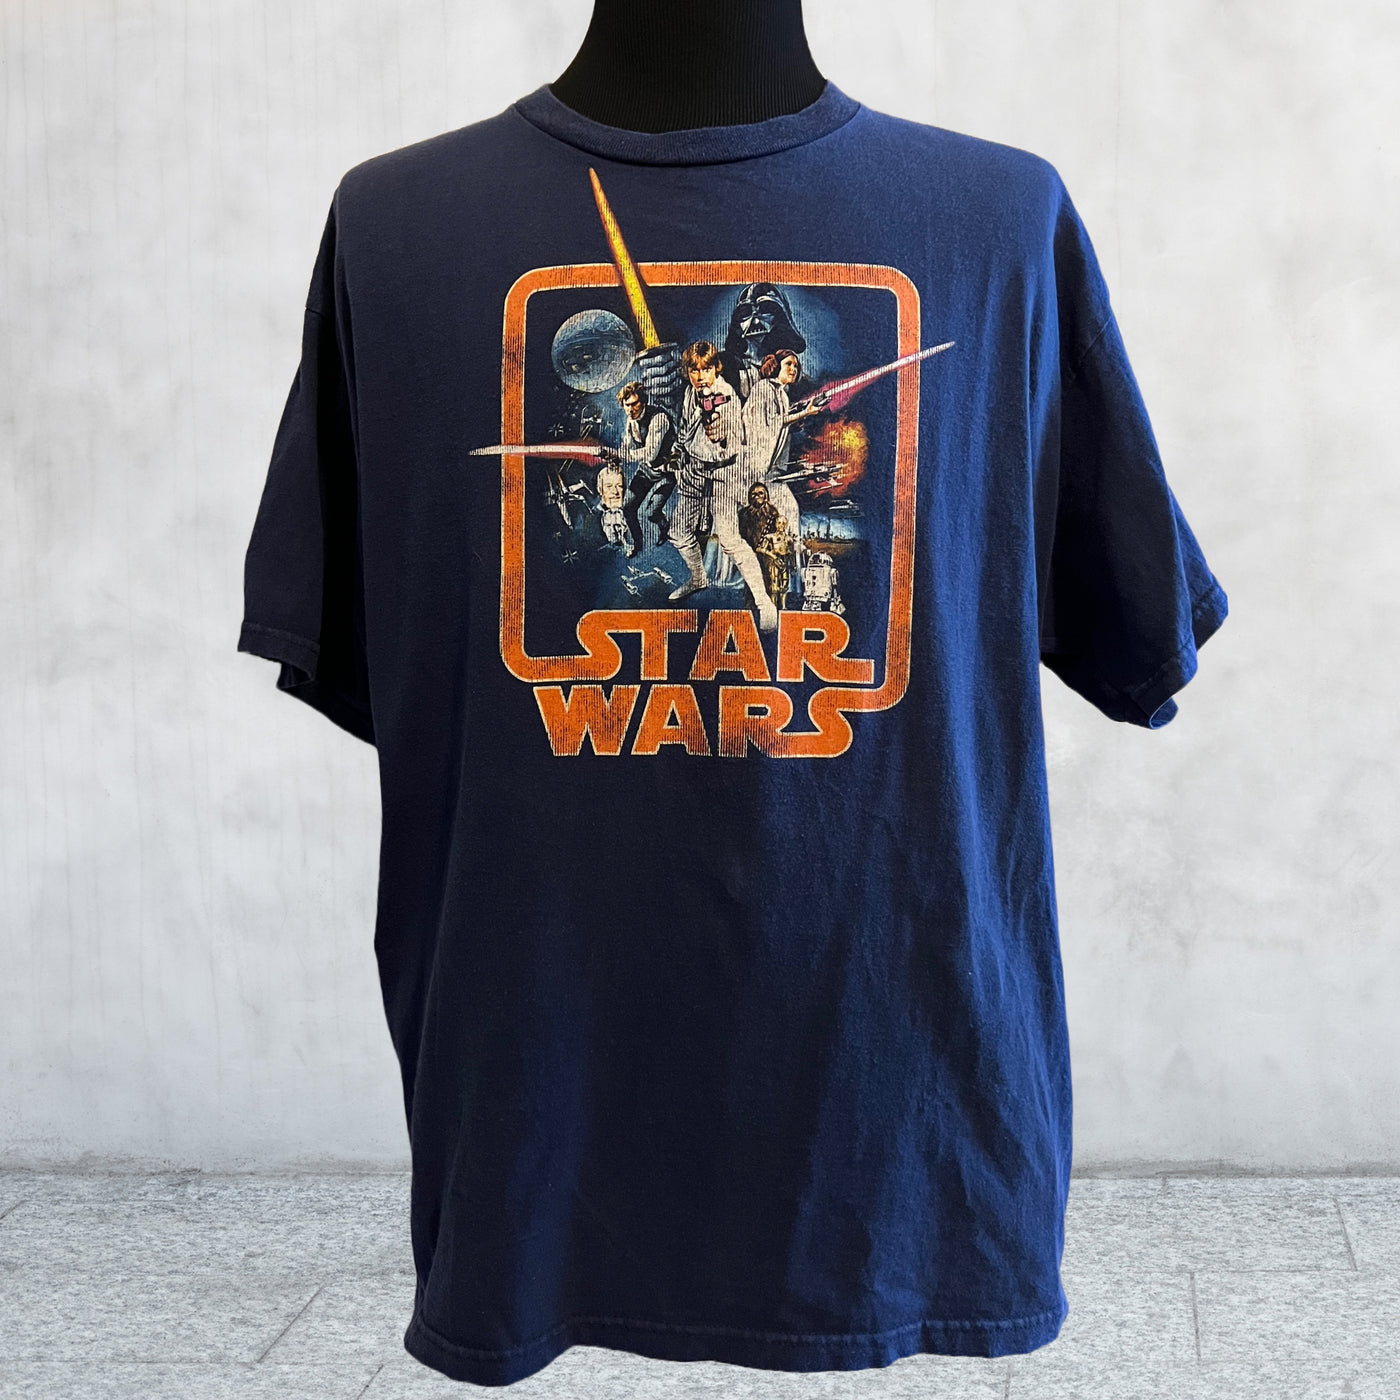 Rare vintage Star Wars Episode IV A New Hope. Shirt front view